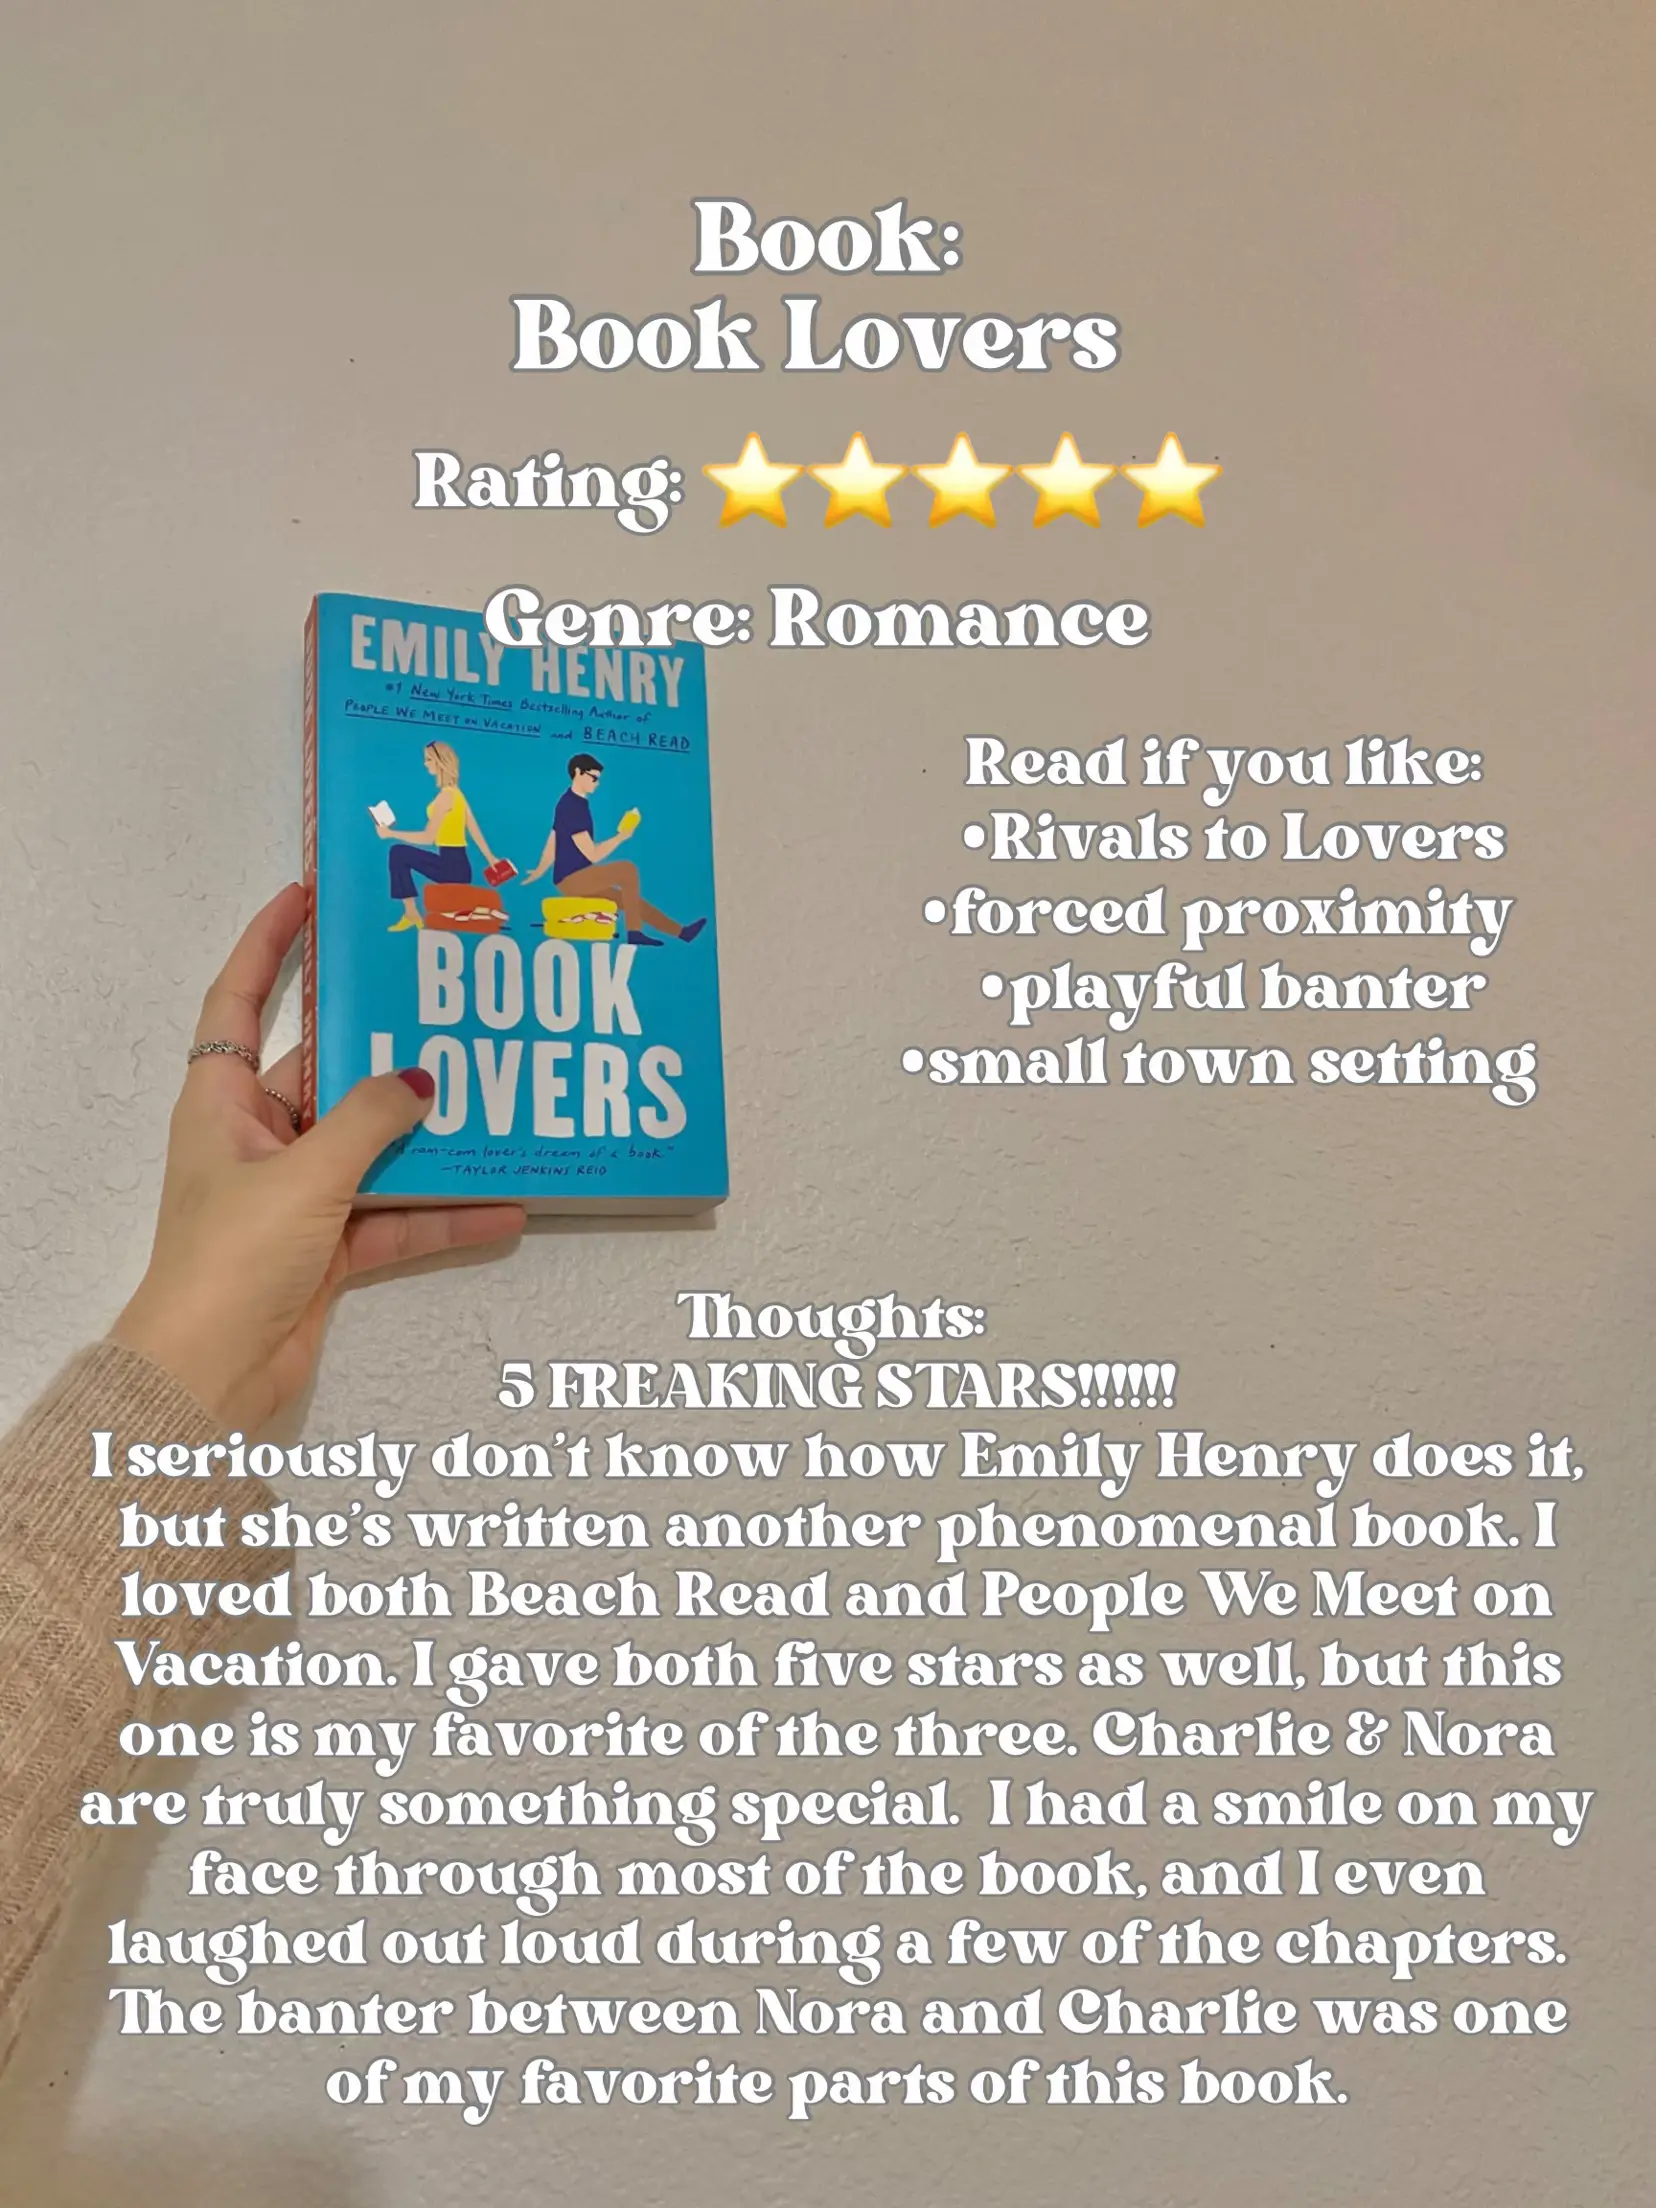  A person is holding a book titled "Book Lovers" by Emily Henry.